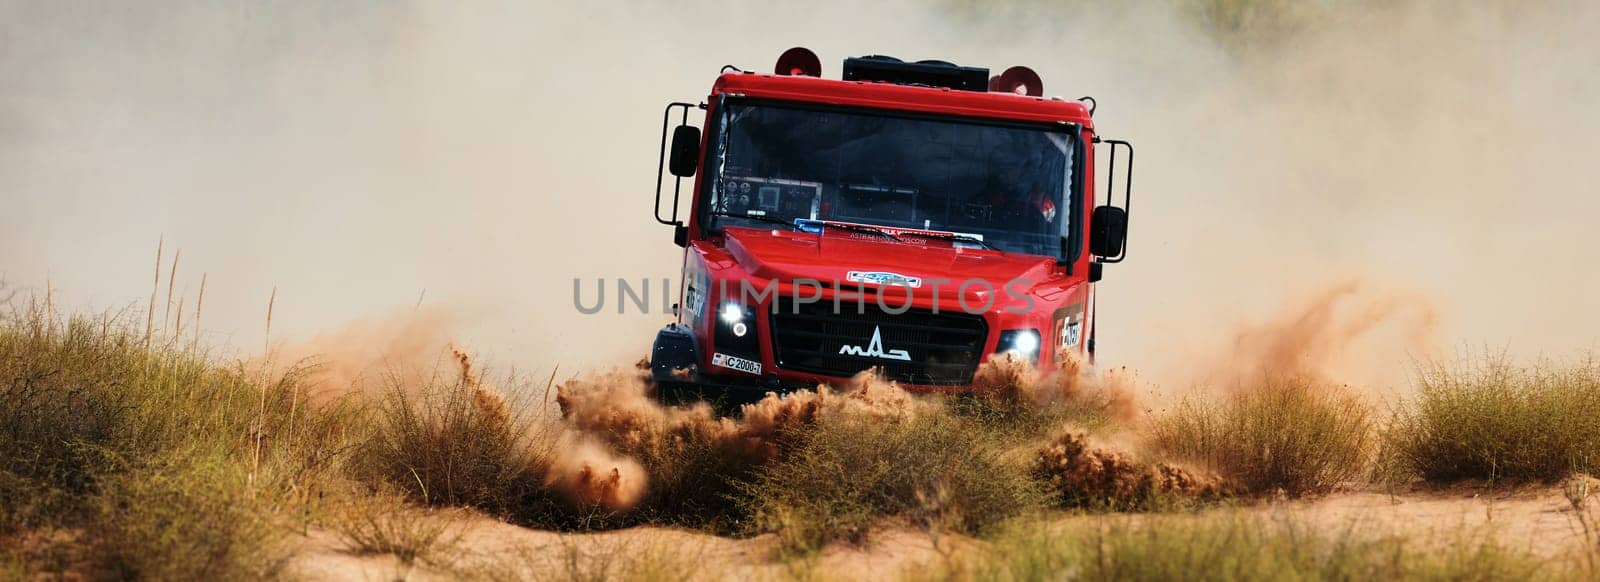 Extreme off-road racing. Sports truck MAZ Sport-auto team gets over the difficult part of the route during the Rally raid in sand. 14.07.2022 Kalmykia, Russia.